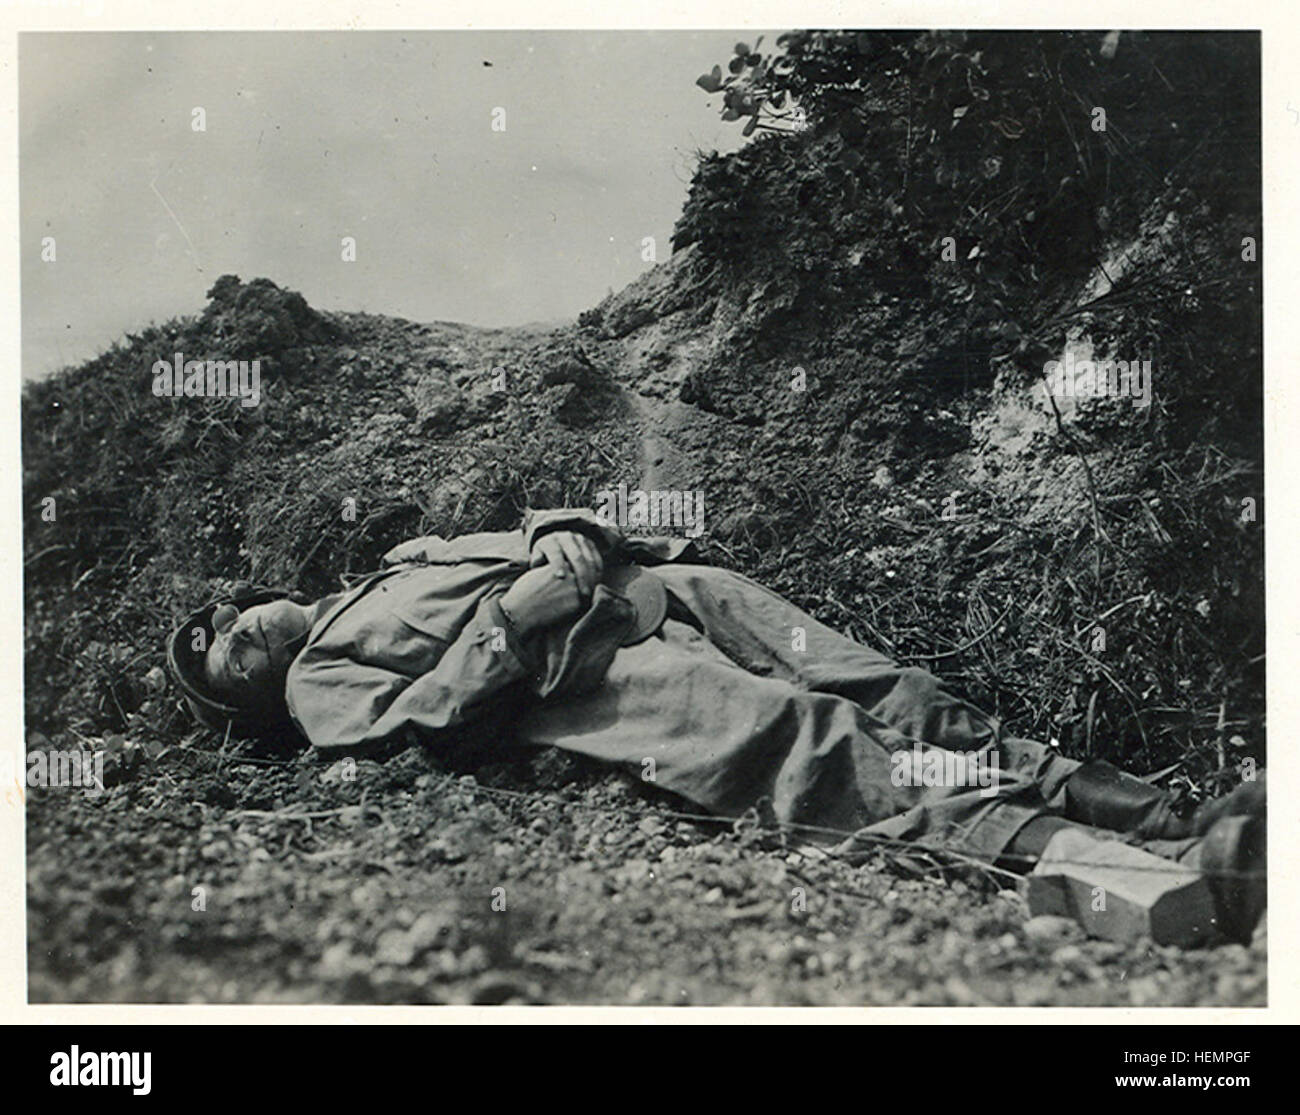 This photo provided by Richard Strasser, perhaps never before published, shows famed World War II war correspondent Ernie Pyle shortly after he was killed by a Japanese machine gun bullet on the island of Ie Shima on April 18, 1945. Pyle, 44, had just arrived in the Pacific after four years of writing his popular column from European battlefronts. The Army photographer who crawled forward under fire to make this picture later said it was withheld by military officials. An AP survey of history museums and archives found only a few copies in existence, and no trace of the original negative.  (AP Stock Photo